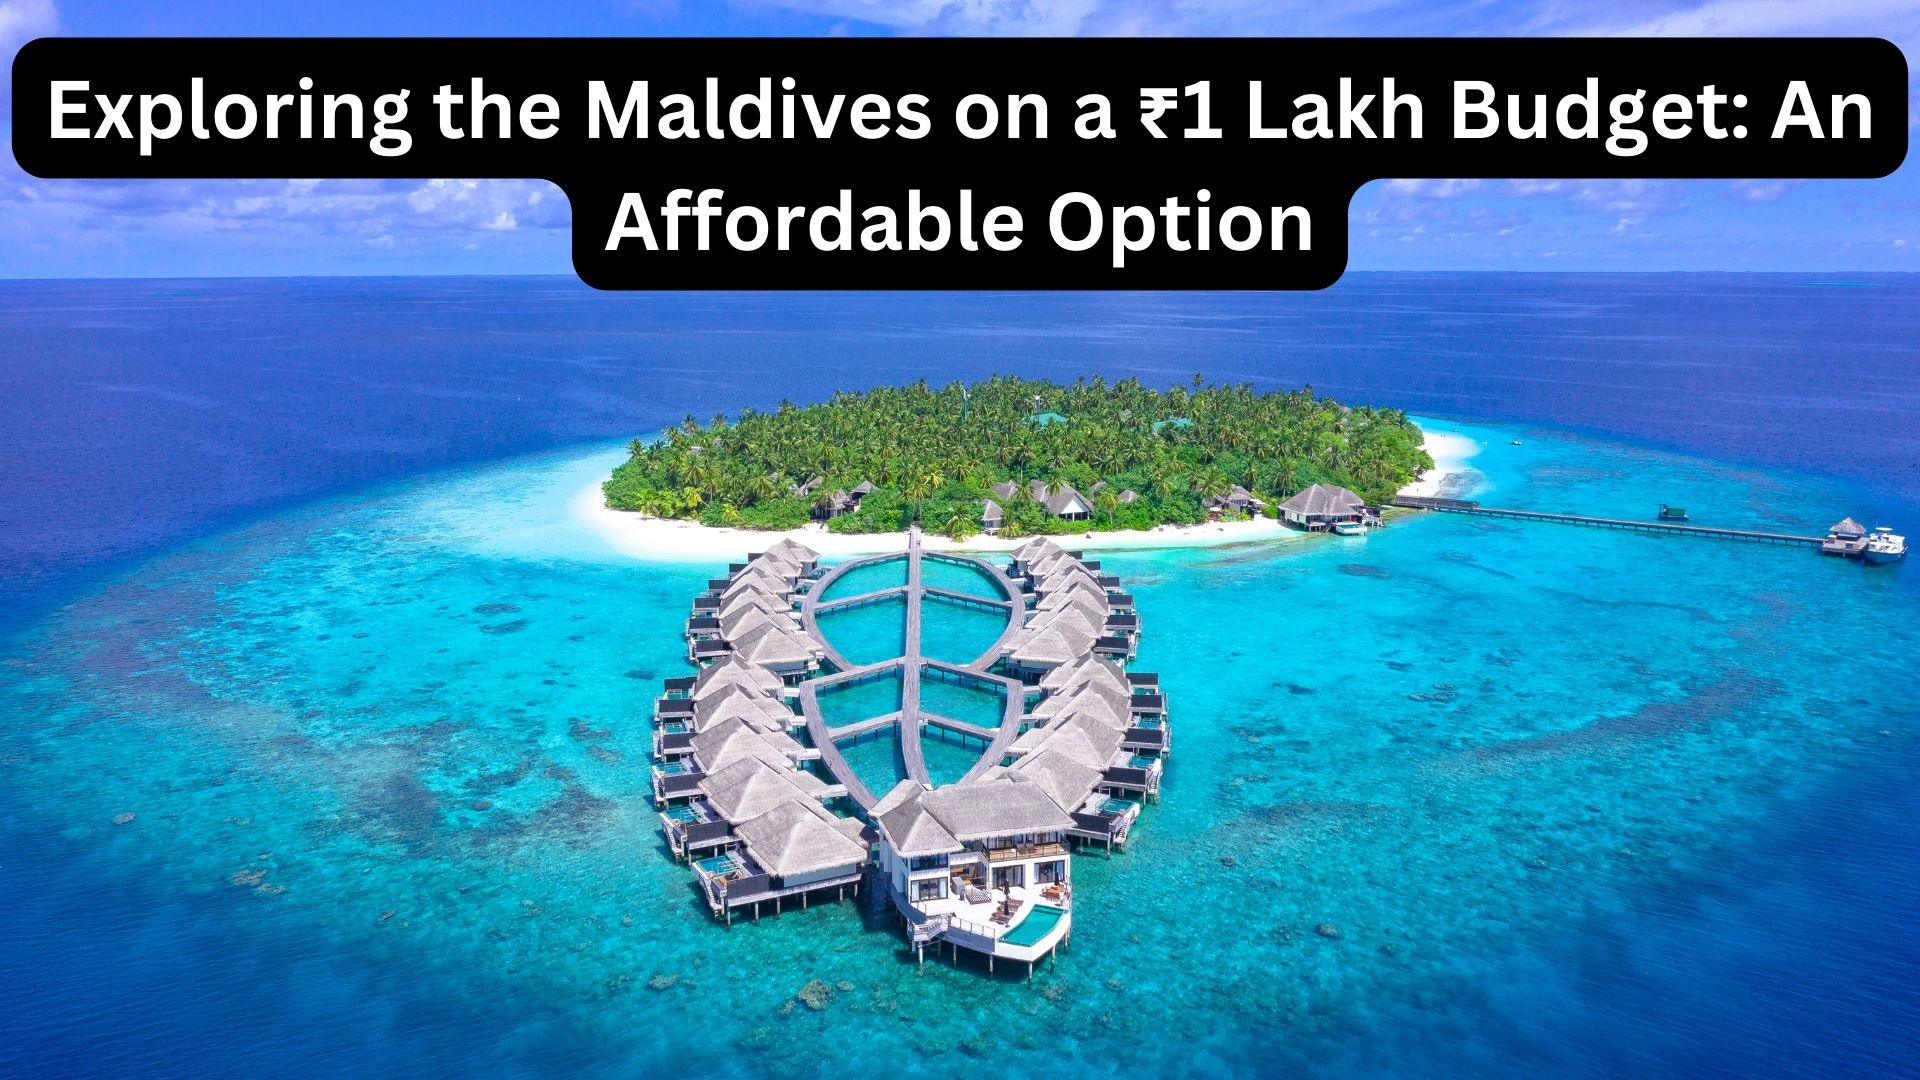 Exploring the Maldives on a ₹1 Lakh Budget: An Affordable Option